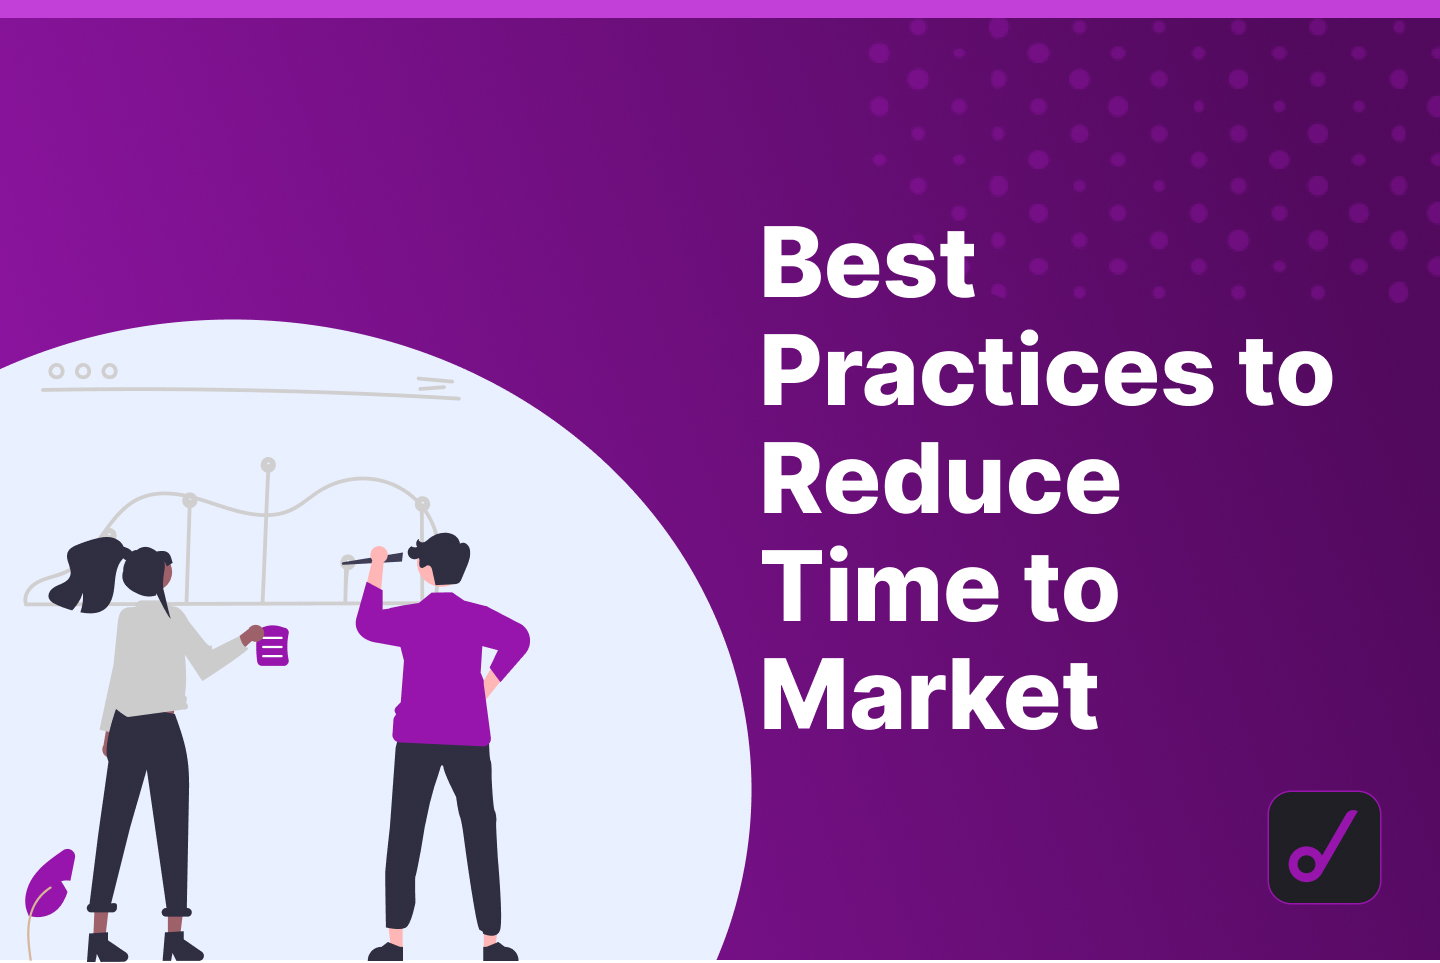 Best Practices to Reduce Time to Market